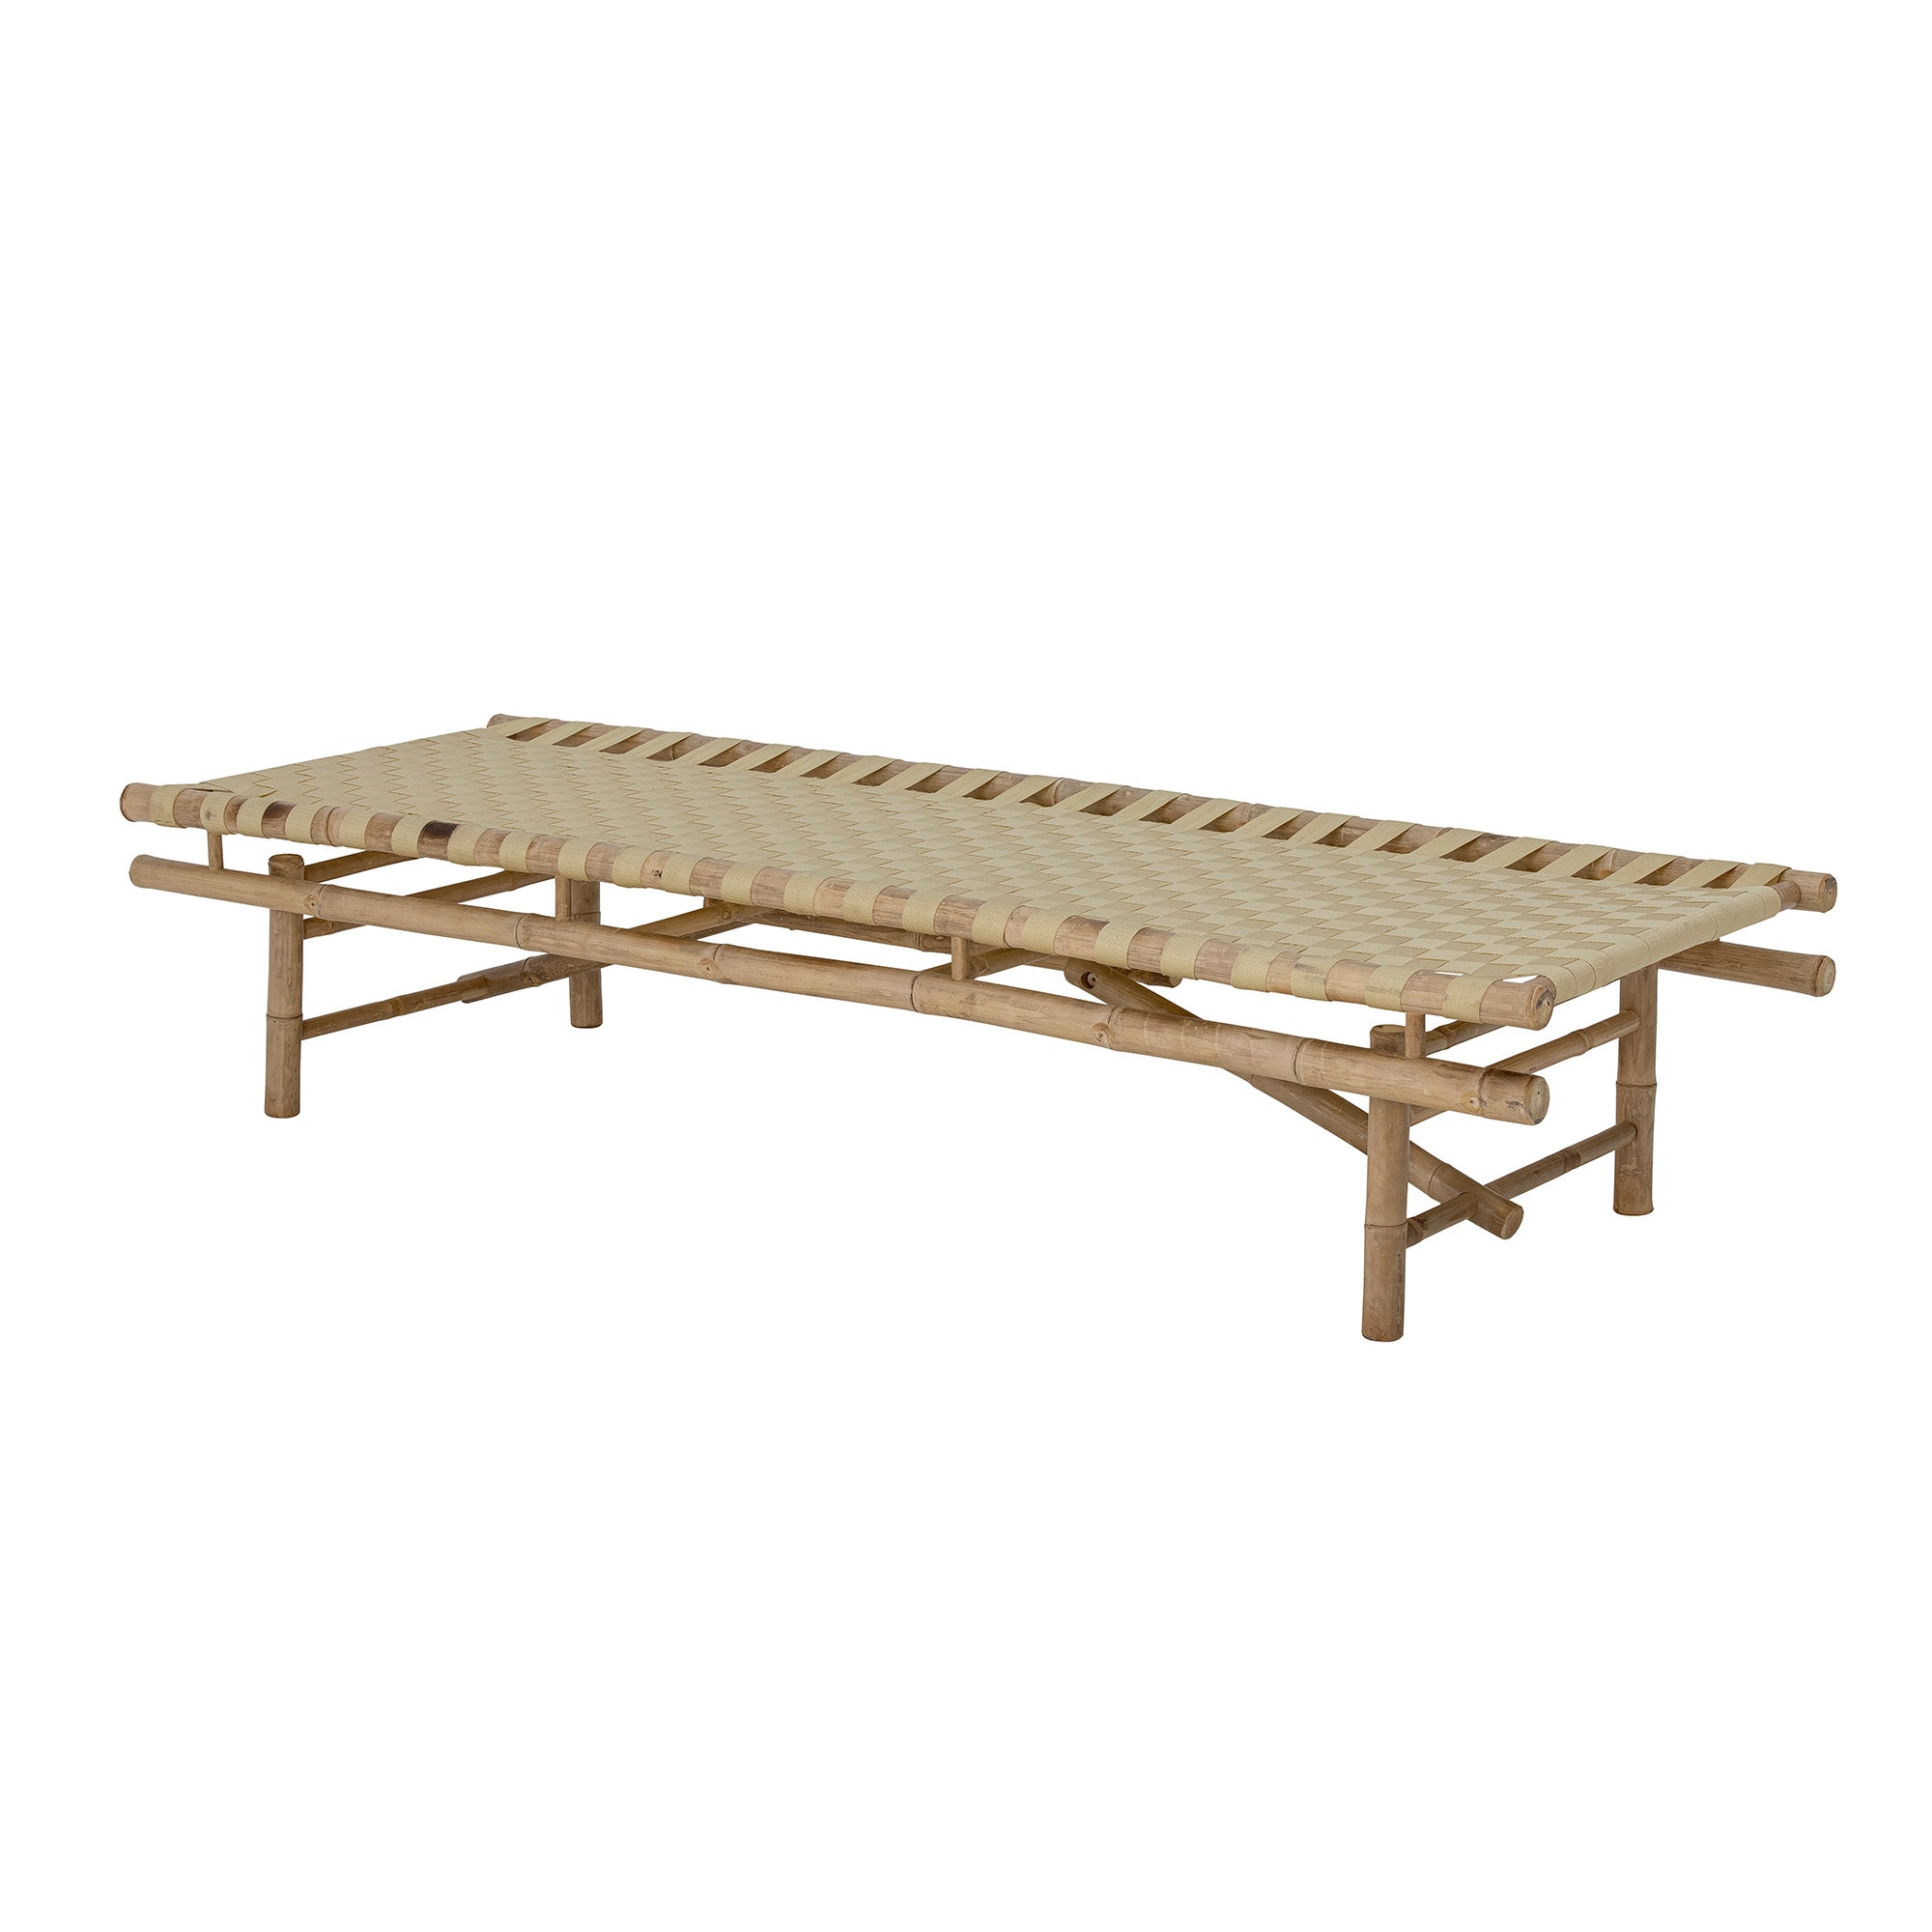 Bloomingville Outdoor Vida Bamboo Daybed in Natural